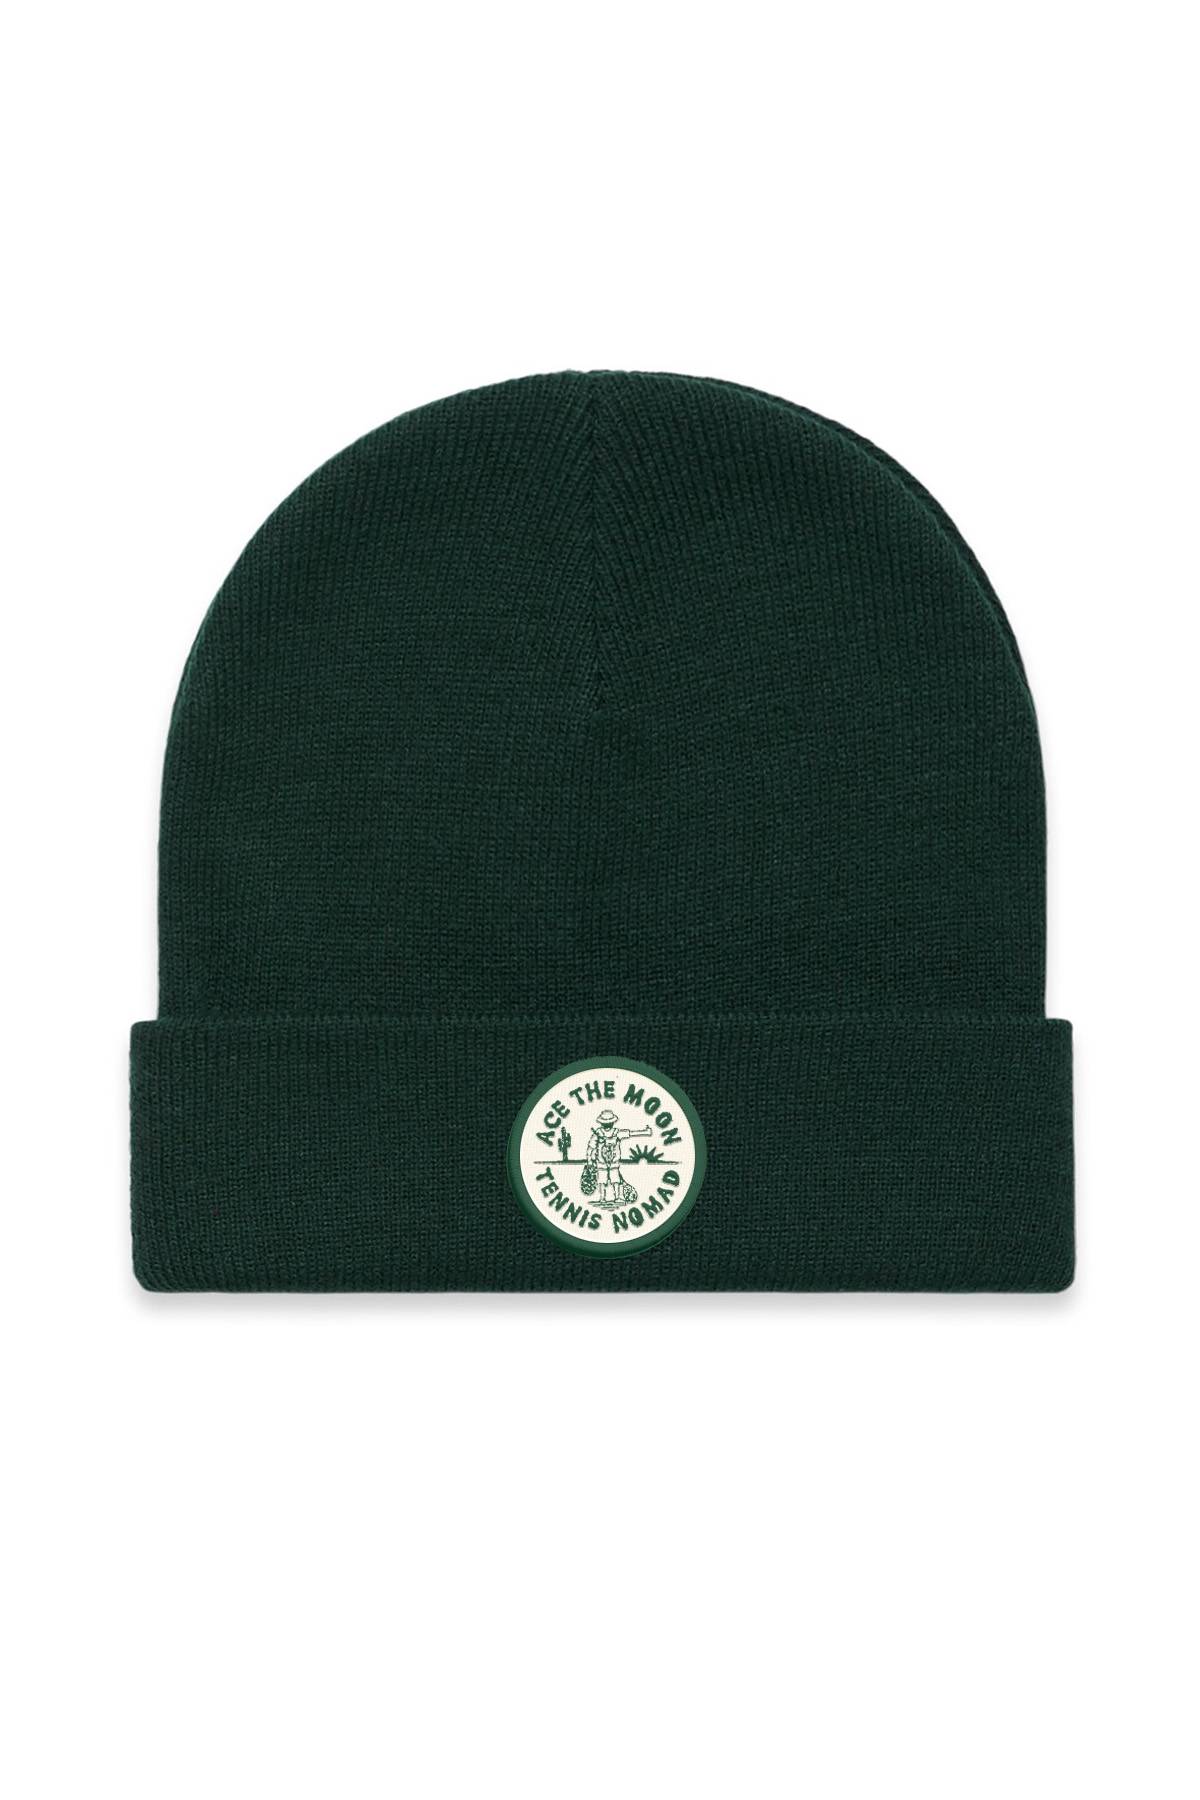 Tennis Nomad Patched Beanies